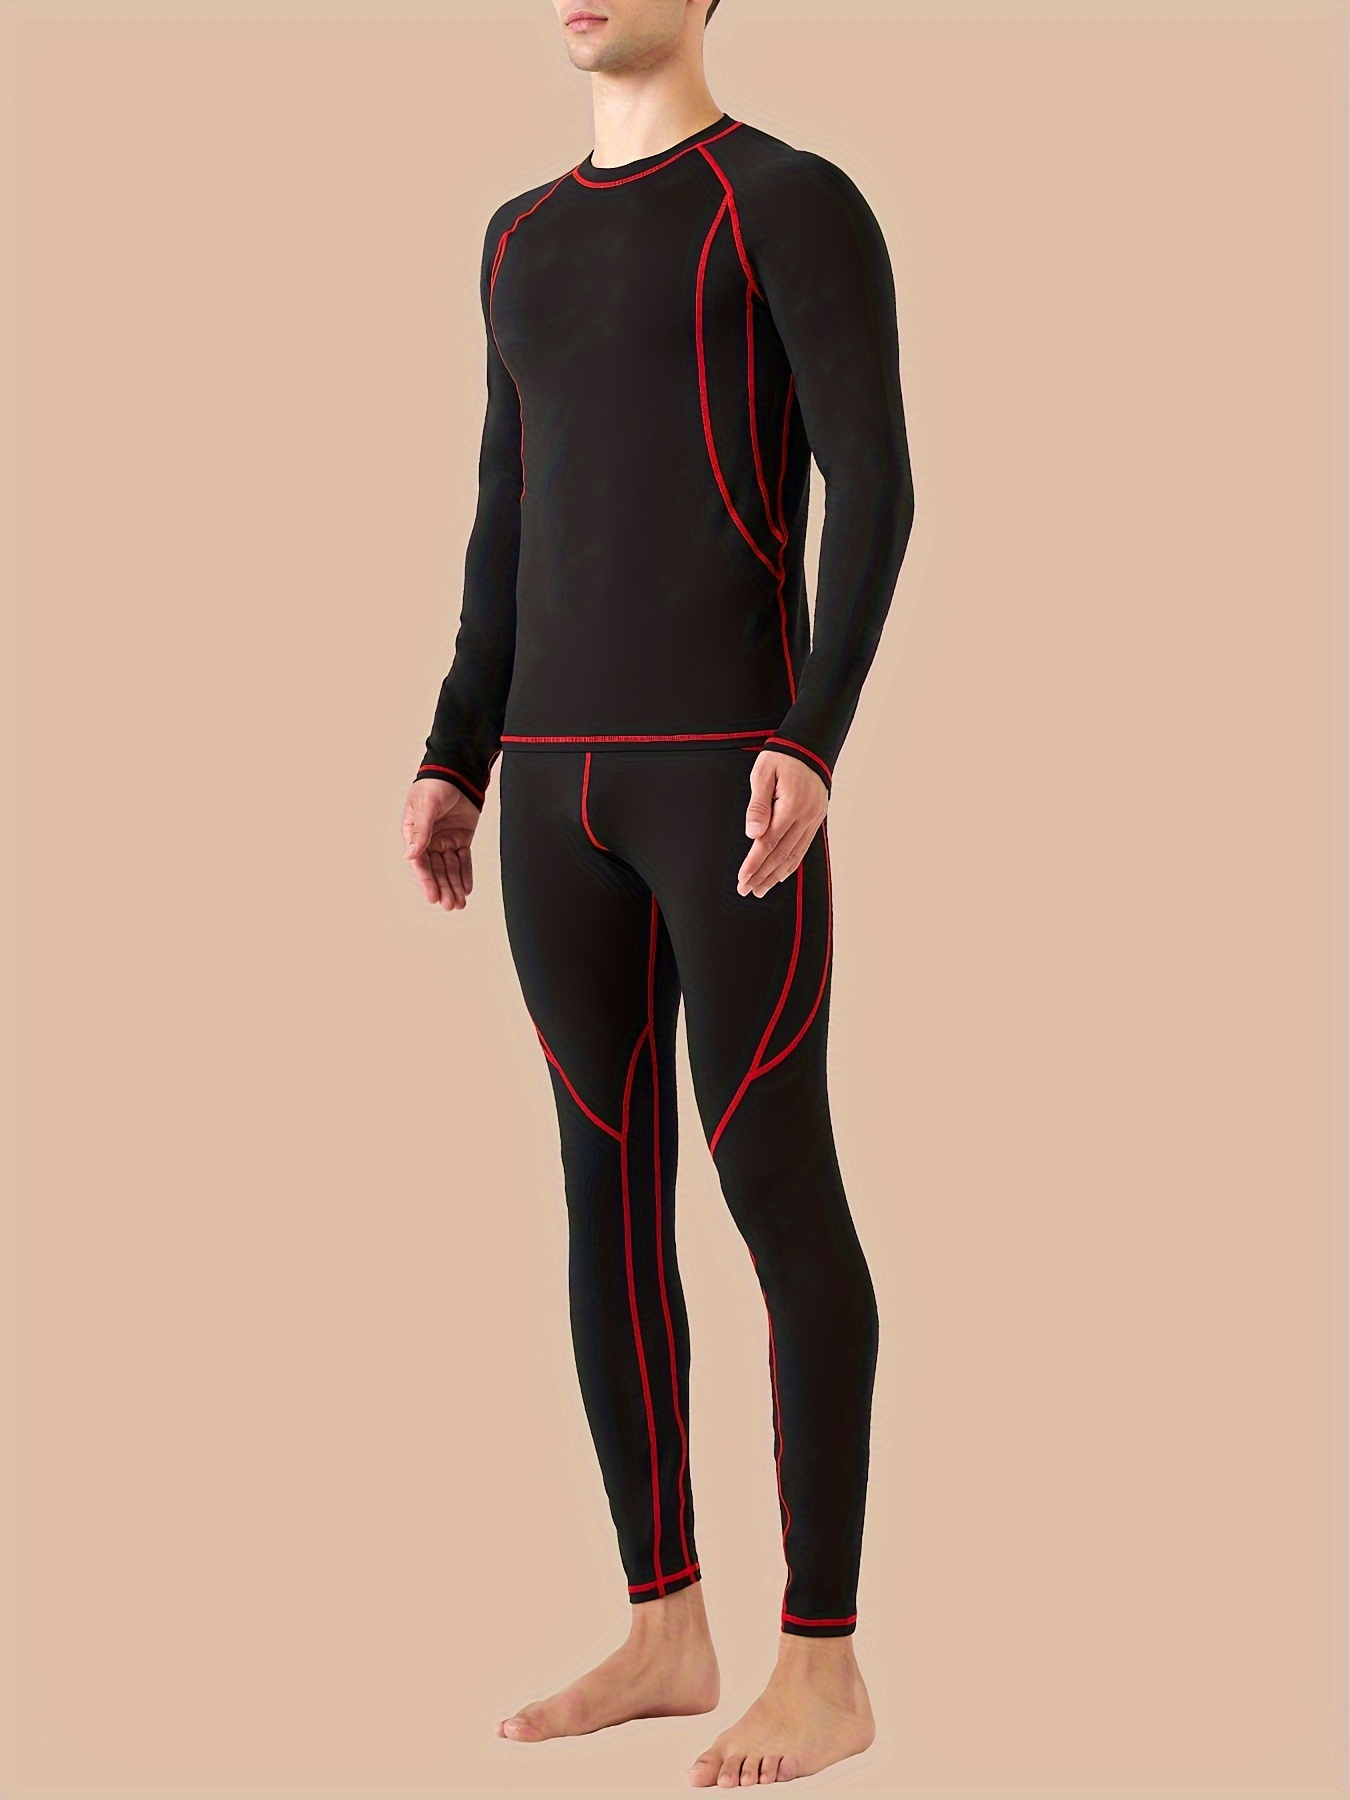 Good Girl Skiing Cheap Thermal Underwear Sets Thermal Fitness